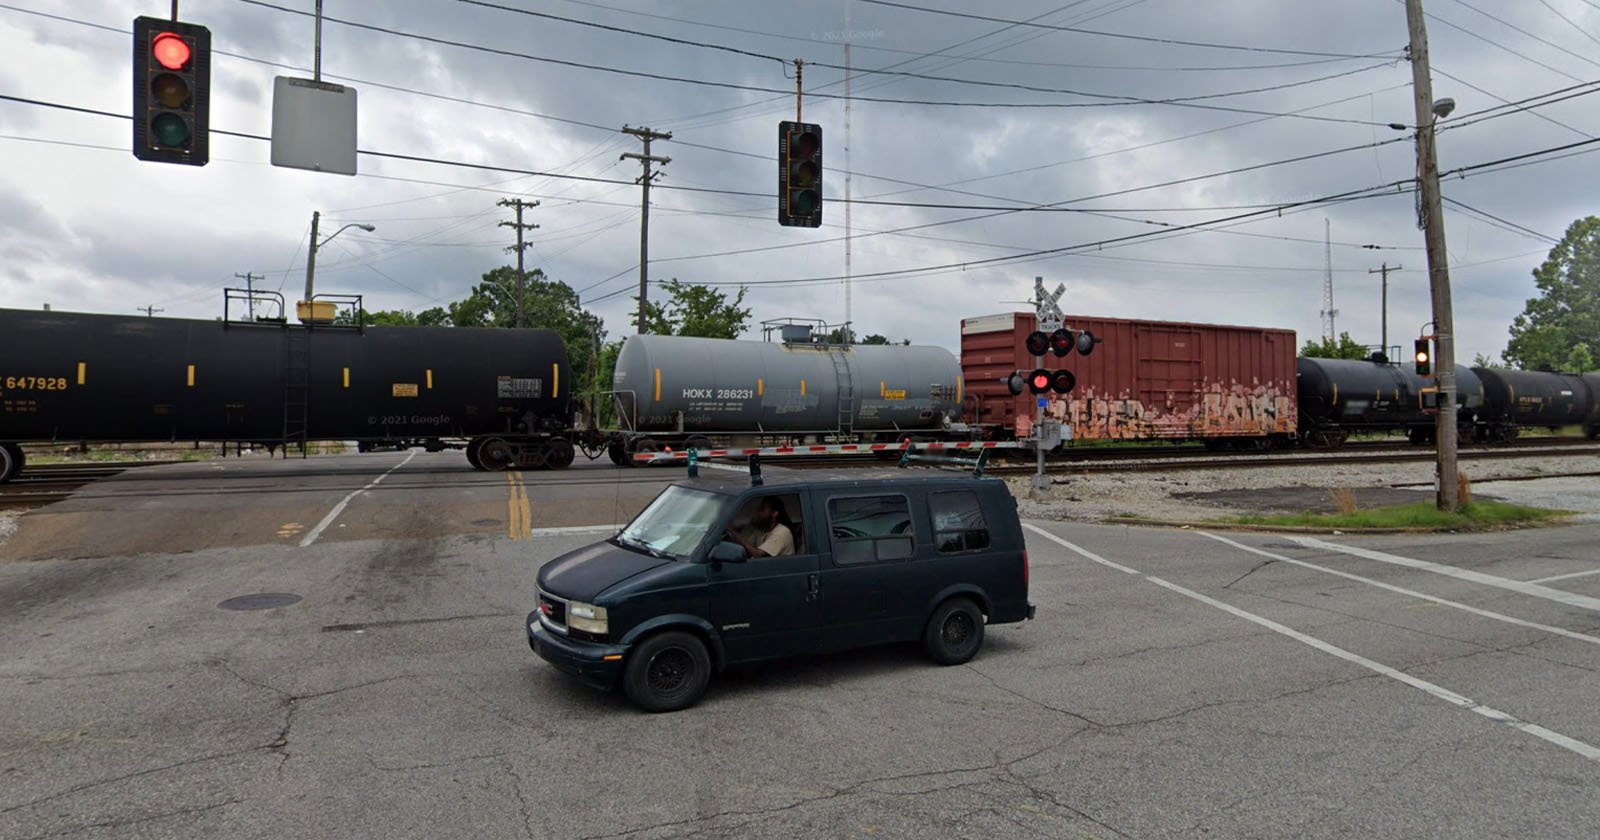 Man Charged With Attempted Murder Over Shooting of Train Photographer